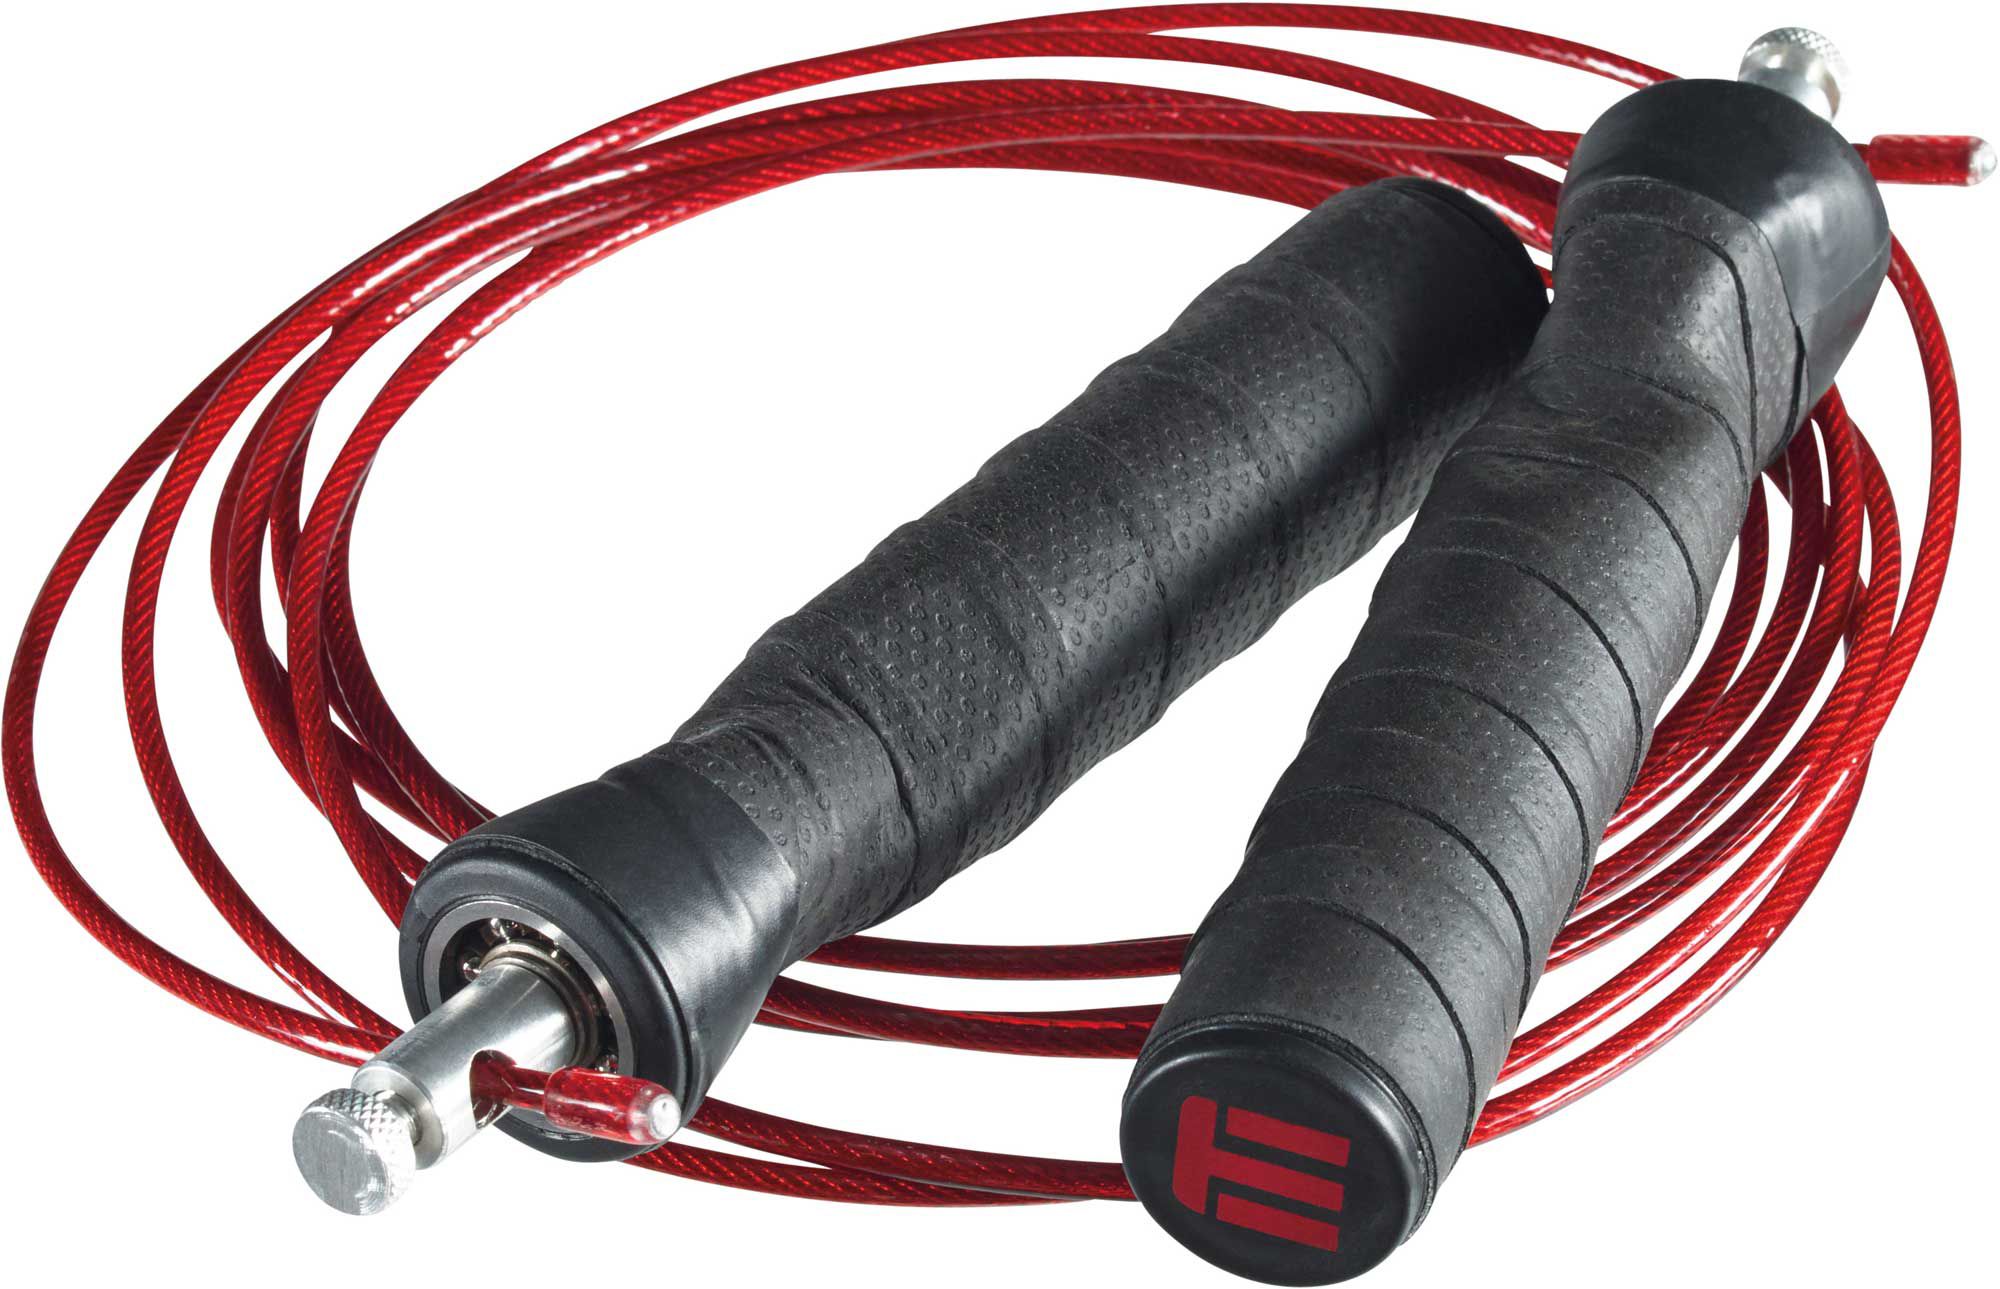 ETHOS Weighted Speed Rope